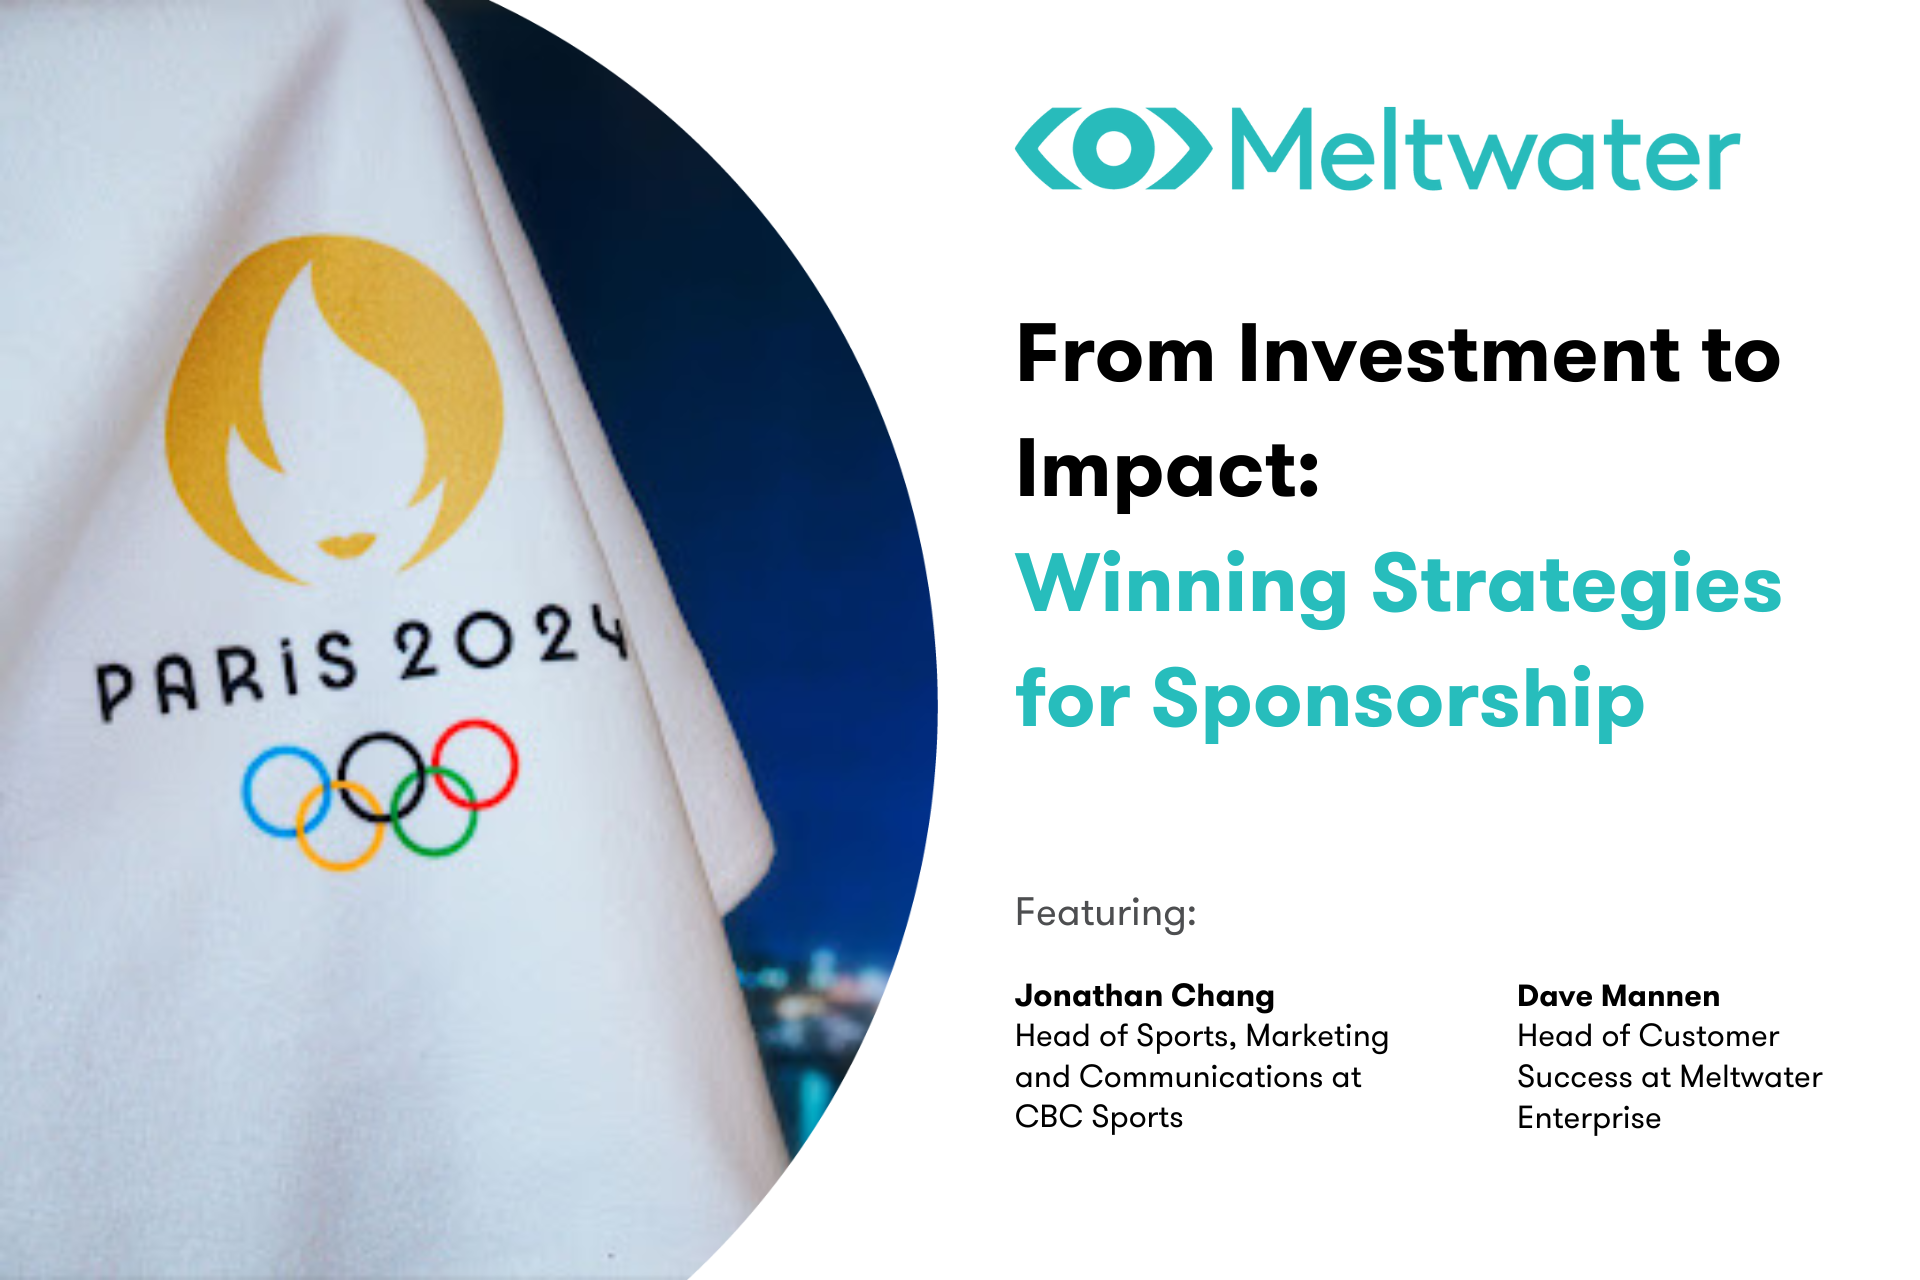 From Investment to Impact: Winning Strategies for Sponsorship